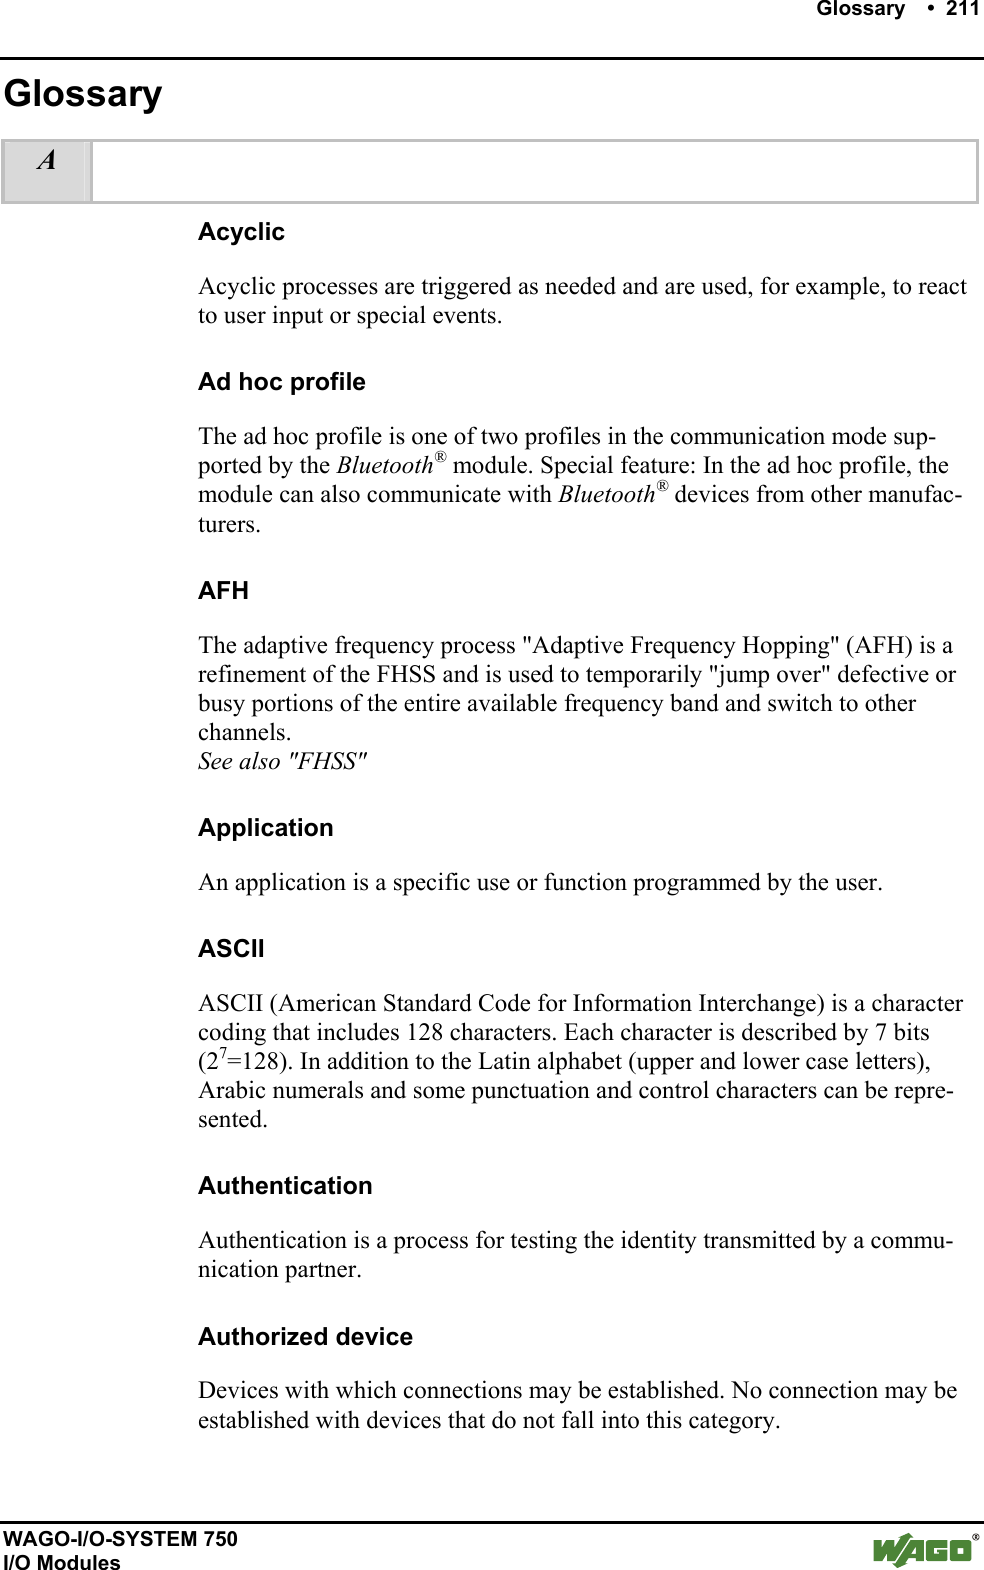    Glossary    •  211      WAGO-I/O-SYSTEM 750 I/O Modules Glossary A    Acyclic Acyclic processes are triggered as needed and are used, for example, to react to user input or special events. Ad hoc profile The ad hoc profile is one of two profiles in the communication mode sup-ported by the Bluetooth® module. Special feature: In the ad hoc profile, the module can also communicate with Bluetooth® devices from other manufac-turers. AFH The adaptive frequency process &quot;Adaptive Frequency Hopping&quot; (AFH) is a refinement of the FHSS and is used to temporarily &quot;jump over&quot; defective or busy portions of the entire available frequency band and switch to other channels. See also &quot;FHSS&quot; Application An application is a specific use or function programmed by the user. ASCII ASCII (American Standard Code for Information Interchange) is a character coding that includes 128 characters. Each character is described by 7 bits (27=128). In addition to the Latin alphabet (upper and lower case letters), Arabic numerals and some punctuation and control characters can be repre-sented. Authentication Authentication is a process for testing the identity transmitted by a commu-nication partner. Authorized device Devices with which connections may be established. No connection may be established with devices that do not fall into this category.  